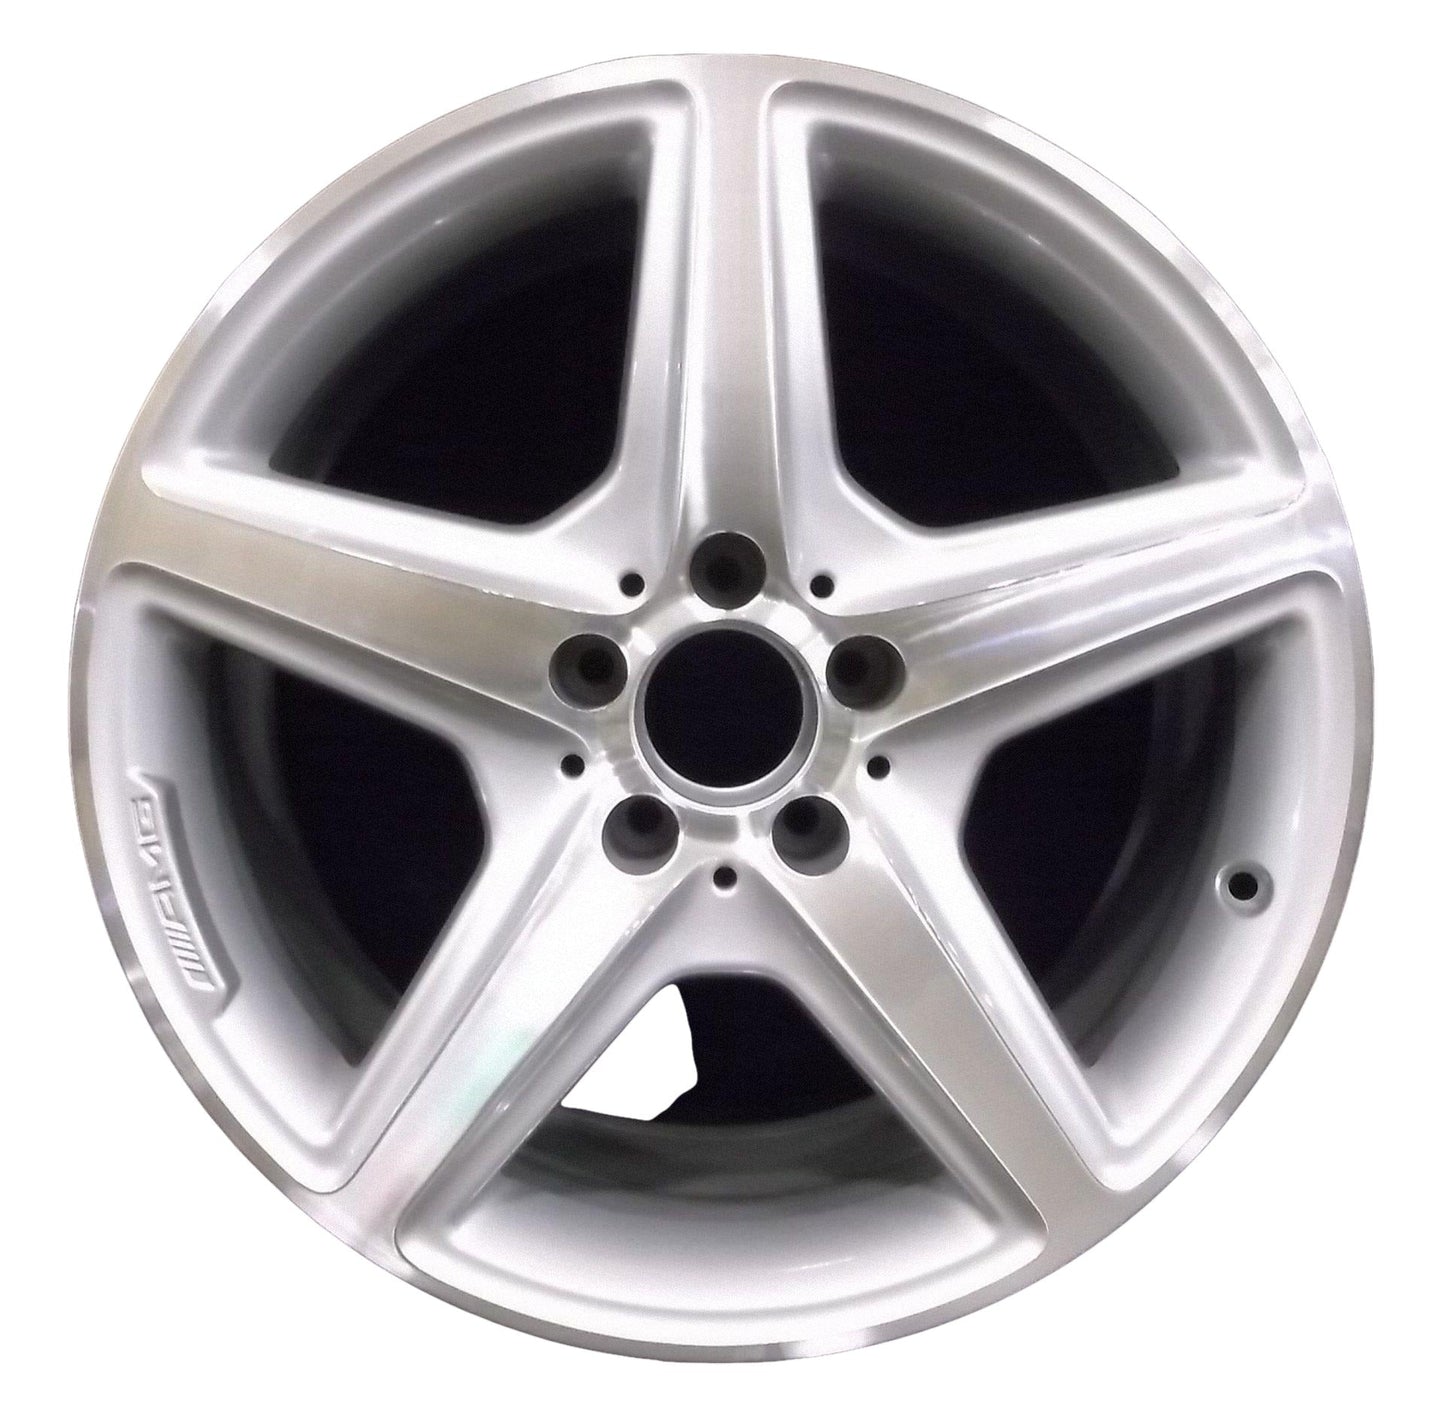 Mercedes CLS400  2015, 2016, 2017 Factory OEM Car Wheel Size 18x9.5 Alloy WAO.85231RE.PS06.MA